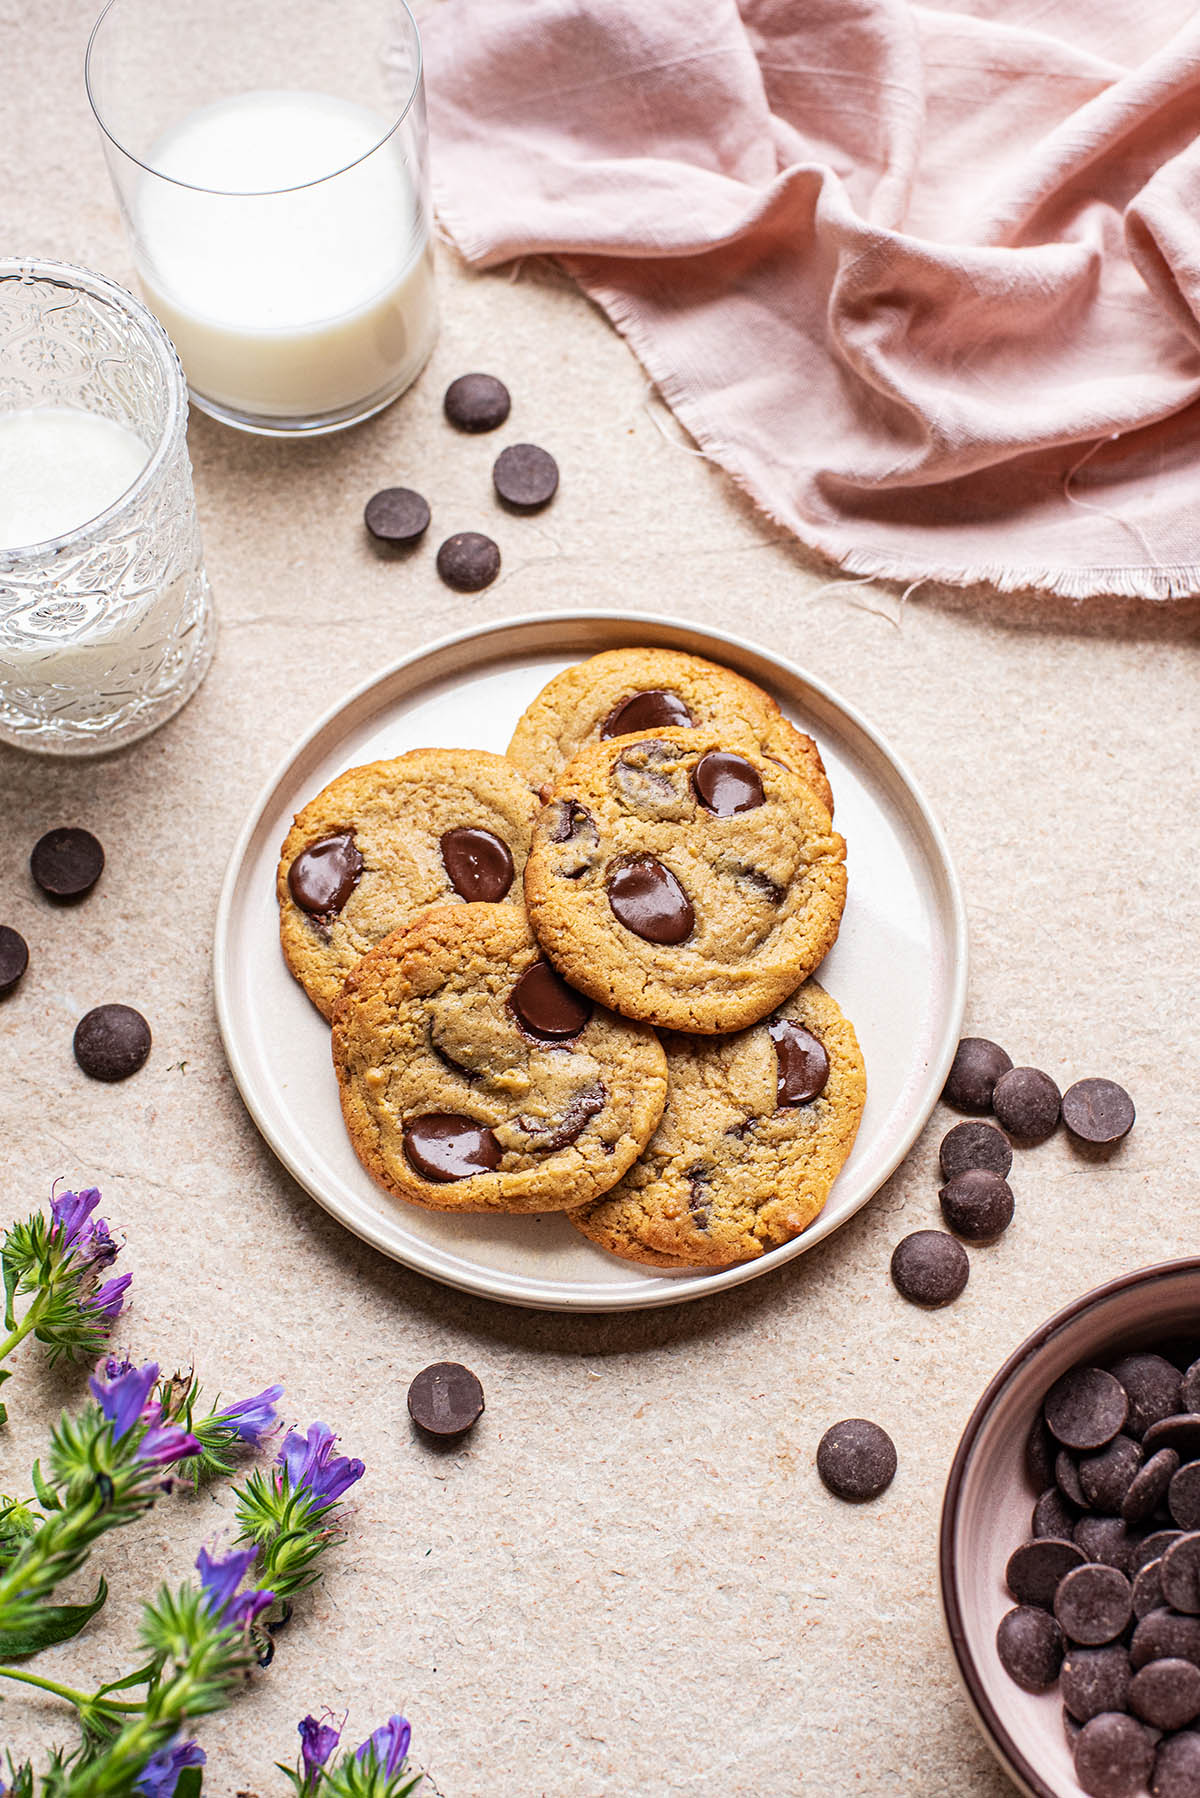 A plate of chocolate chip cookies on a stone surface with a pink linen, glasses of milk, scattered chocolate chips, and purple flowers nearby.